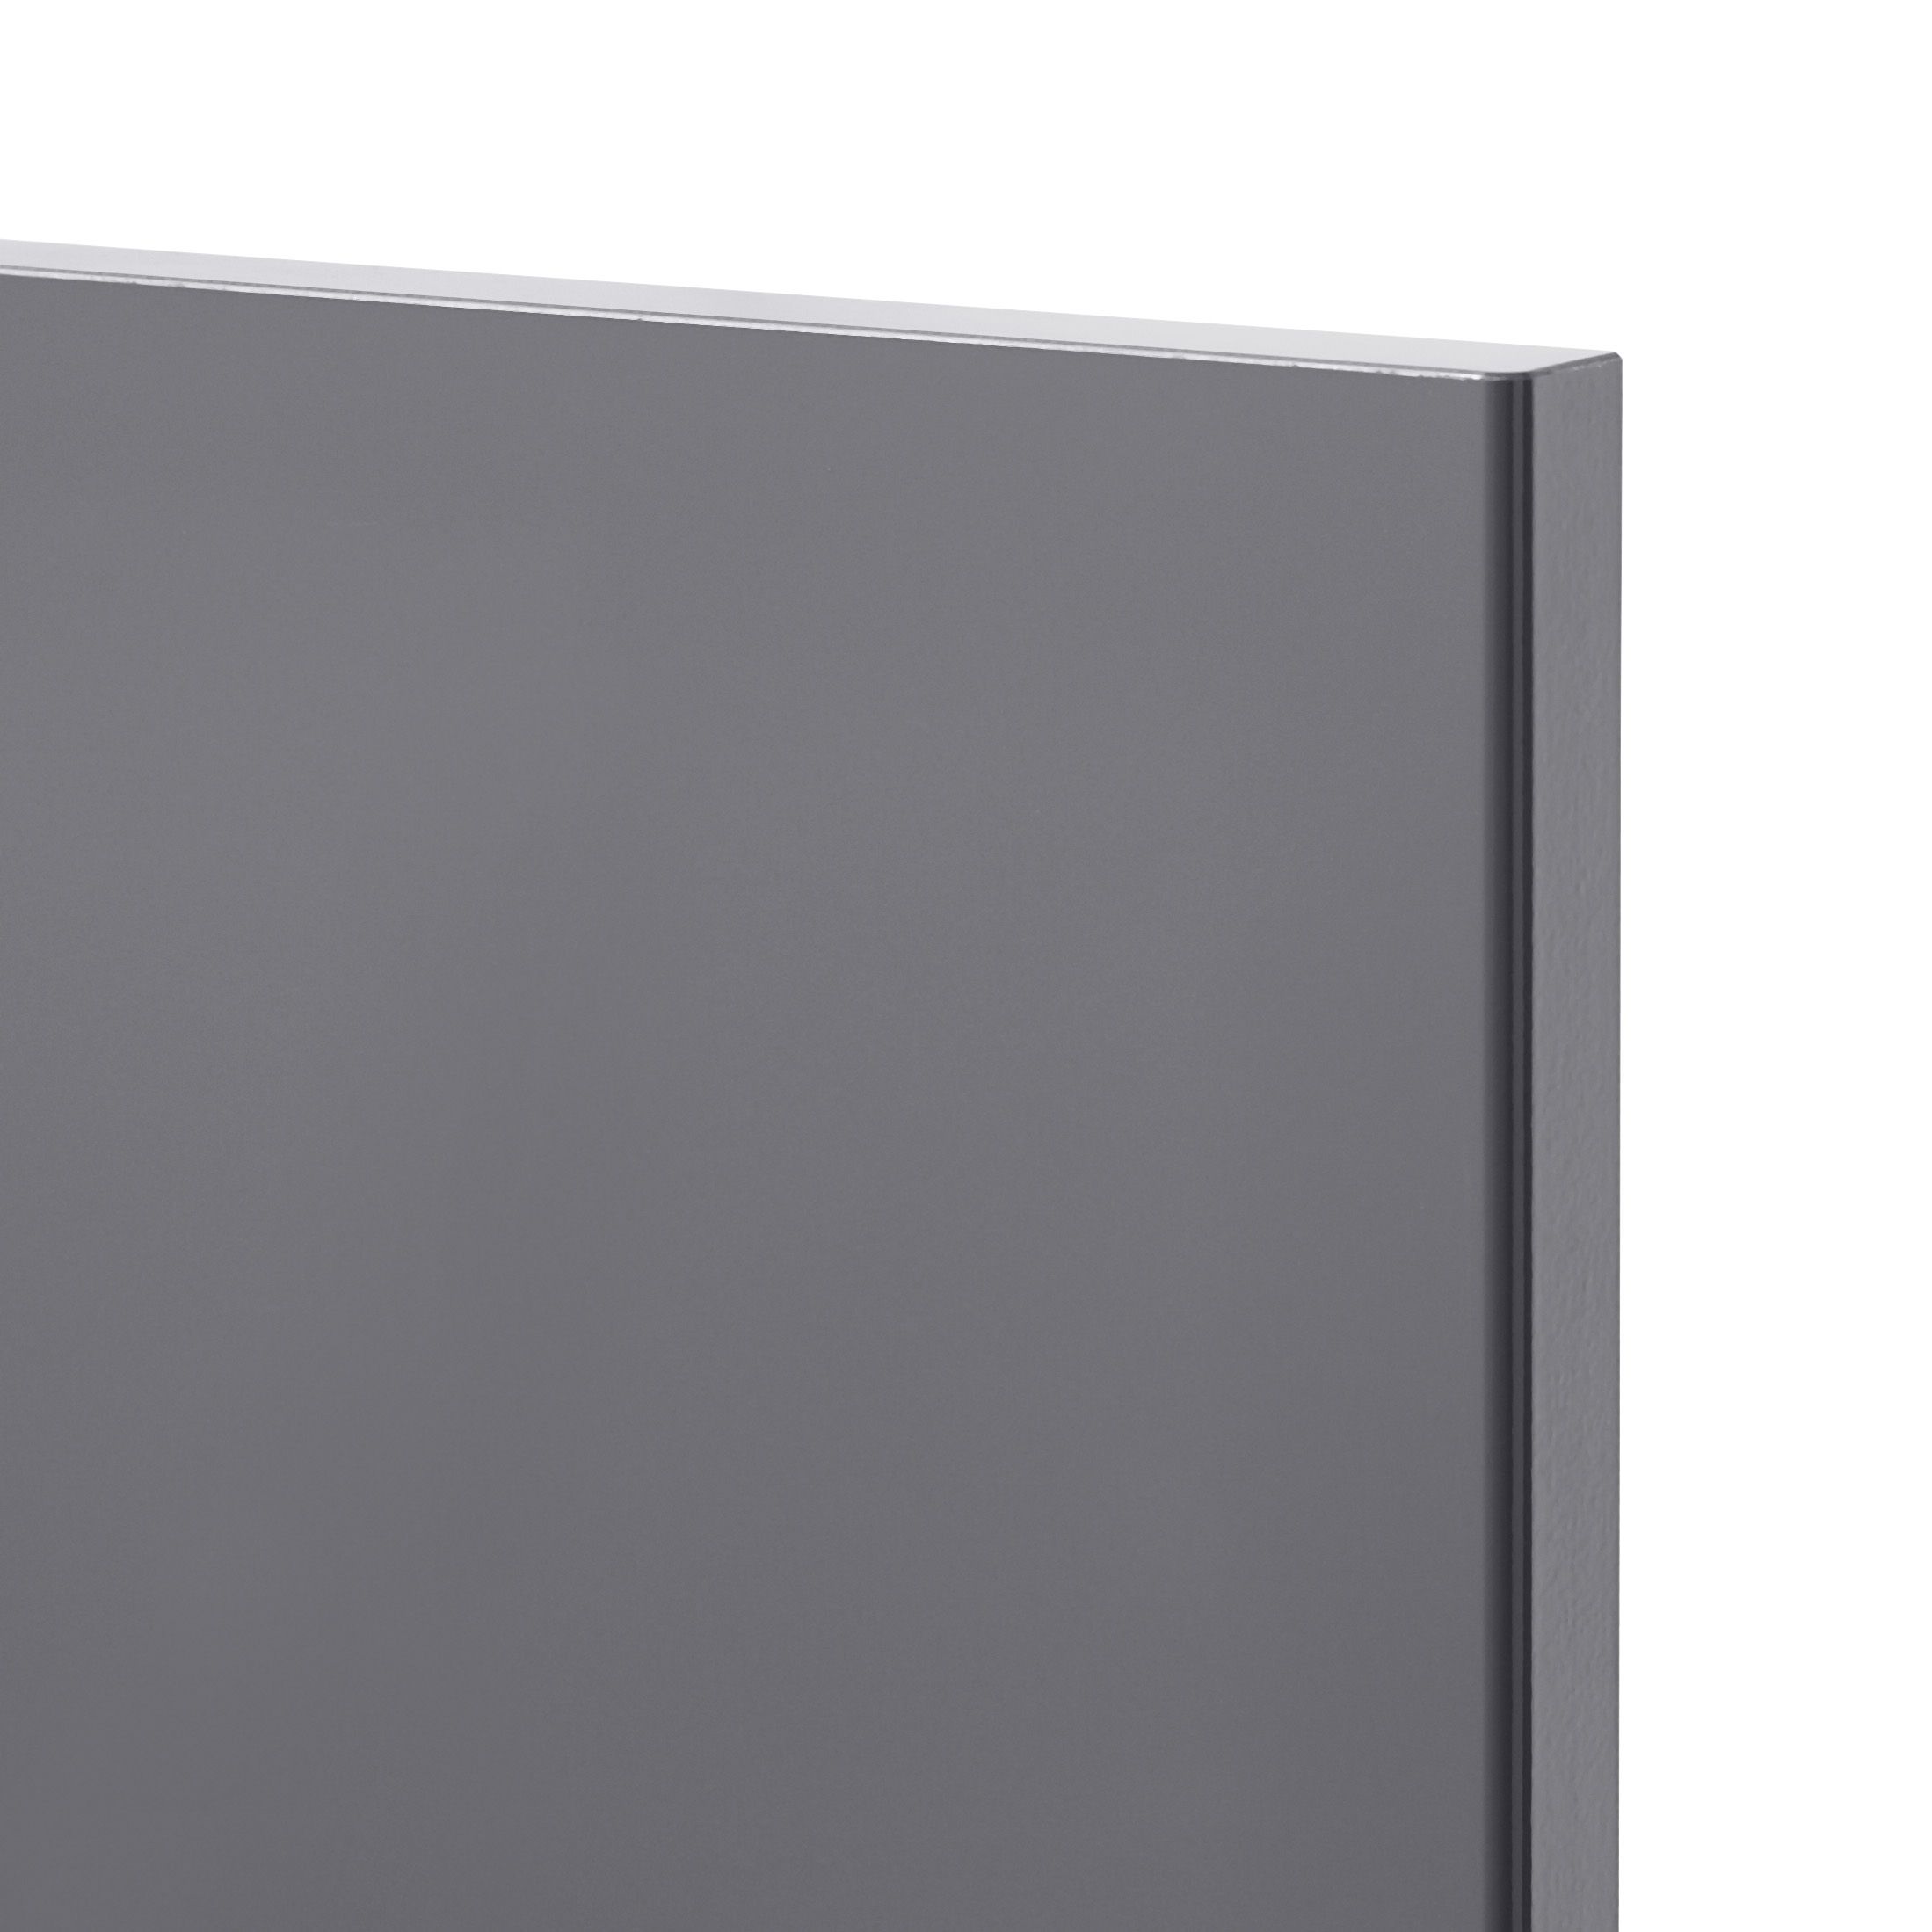 GoodHome Stevia Gloss anthracite slab Appliance Cabinet door (W)600mm (H)626mm (T)18mm